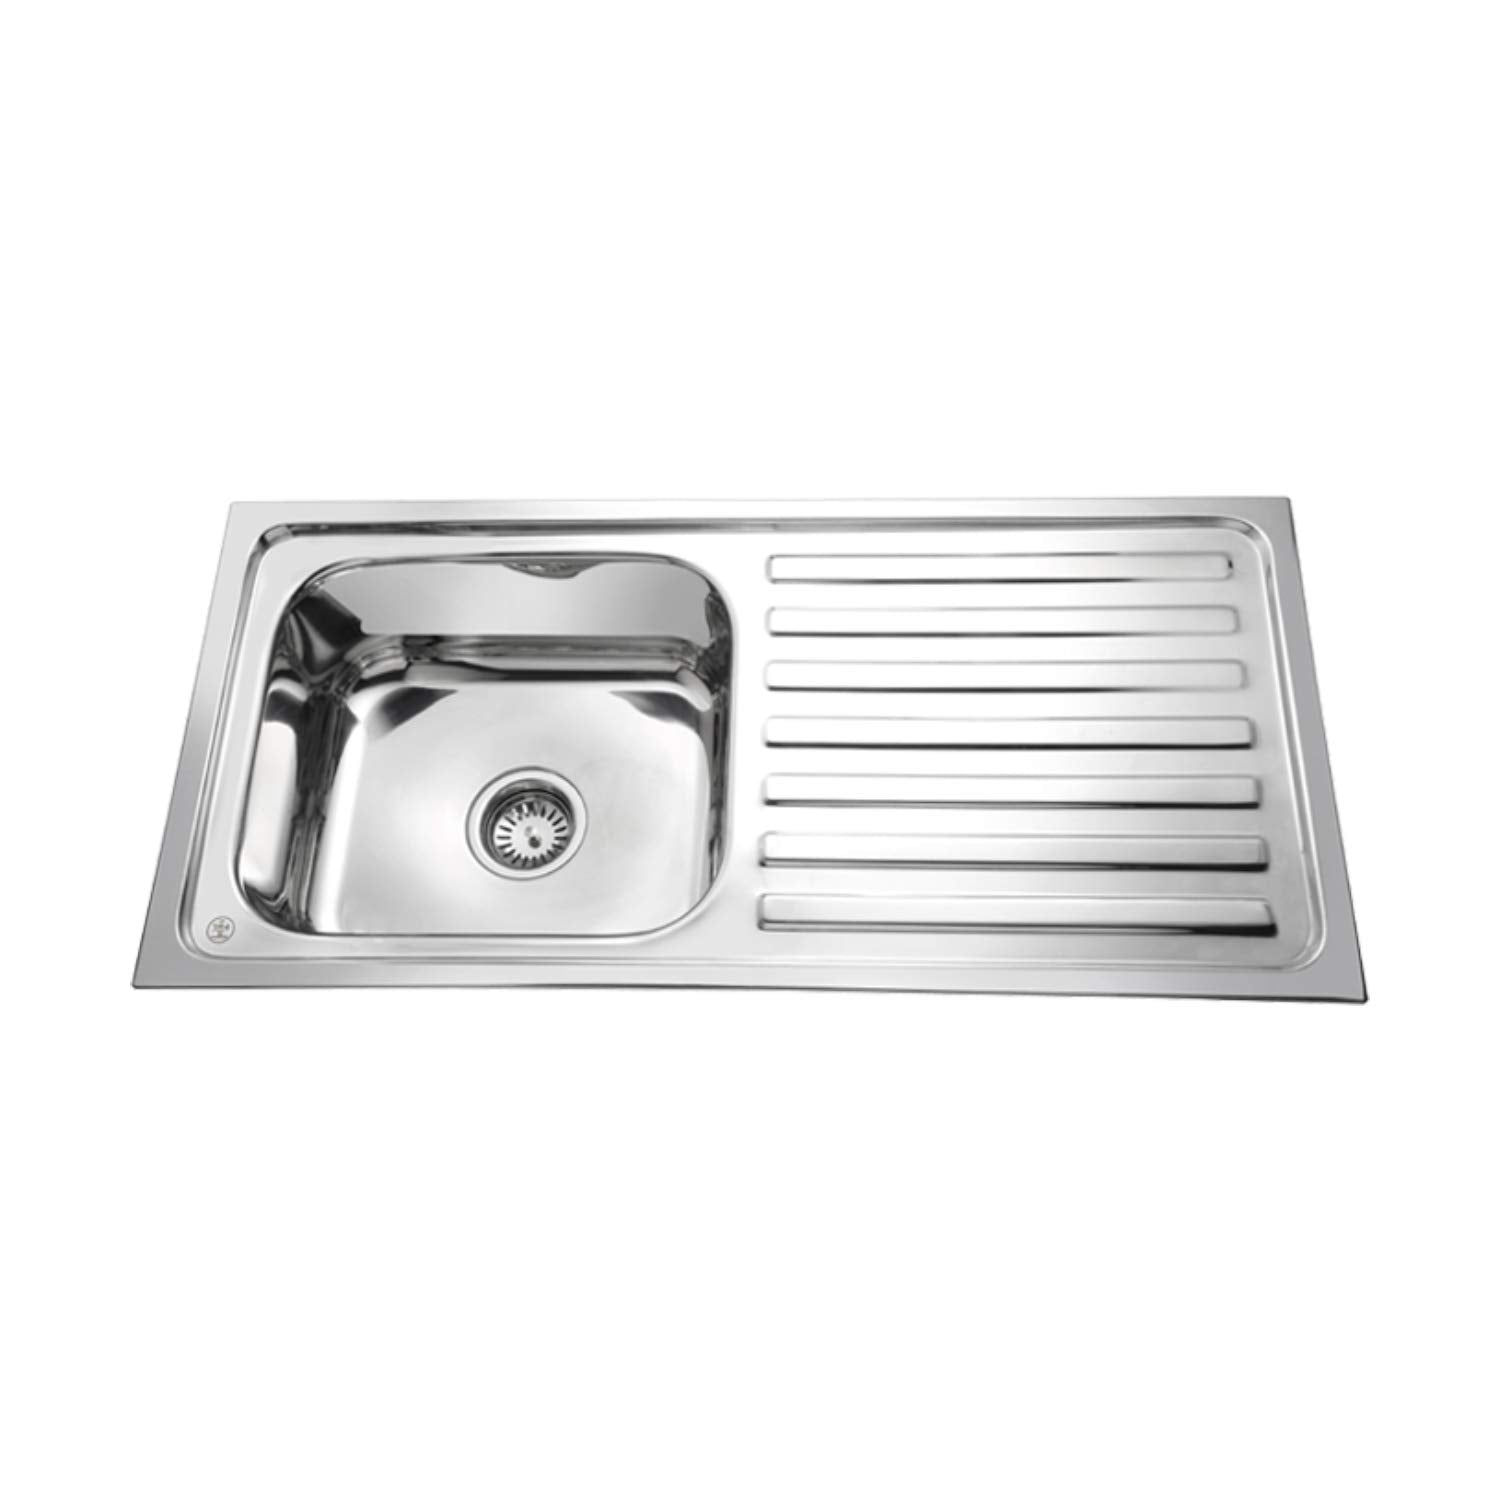 Parryware C856871 Eco Series (New) Flat Edge- Gloss Finish Single Bowl with Big Drain Kitchen Sink